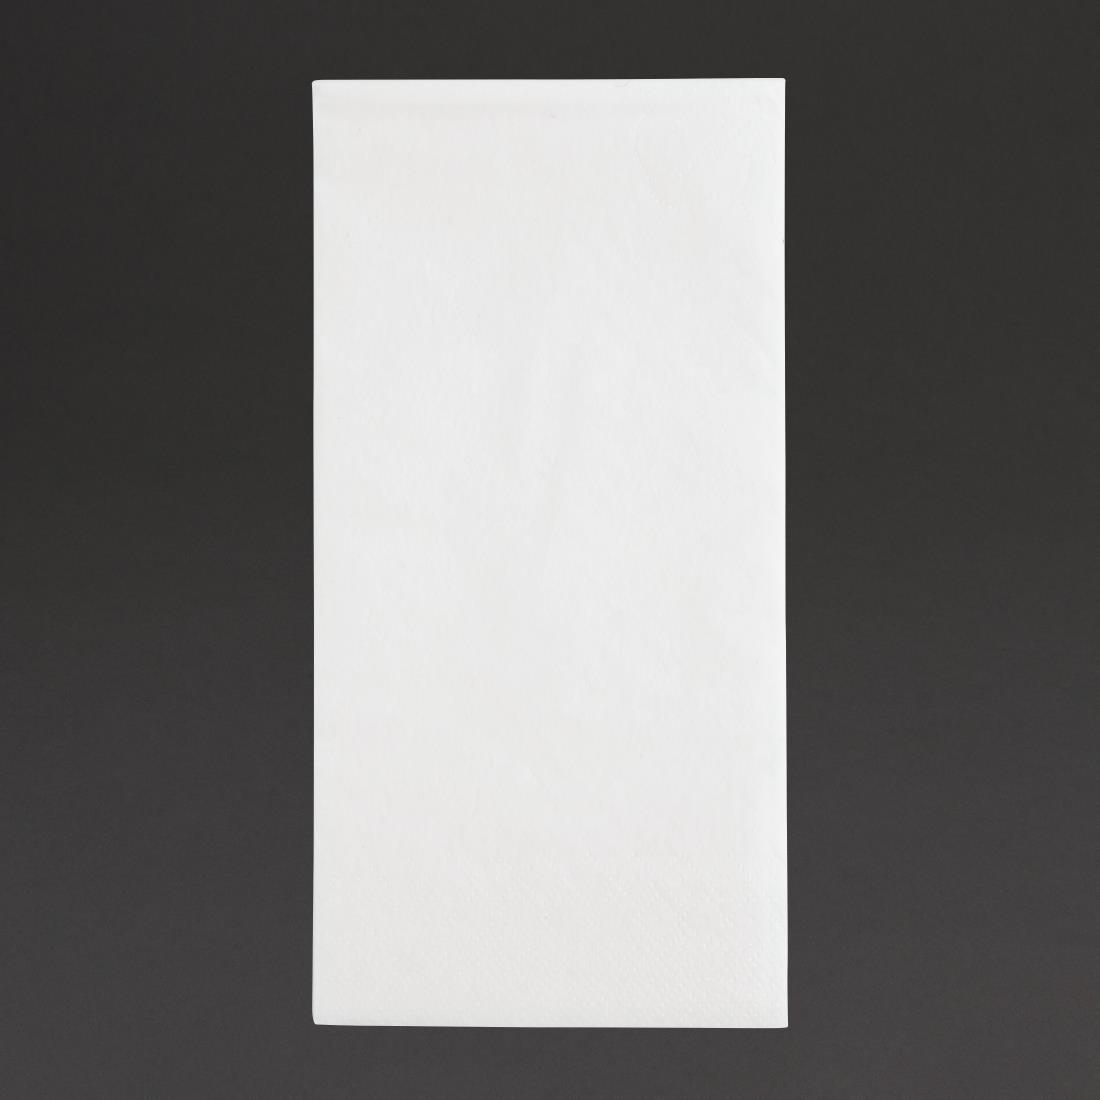 Fiesta Recyclable Dinner Napkin White 40x40cm 2ply 1/8 Fold (Pack of 2000) - FE243  - 1